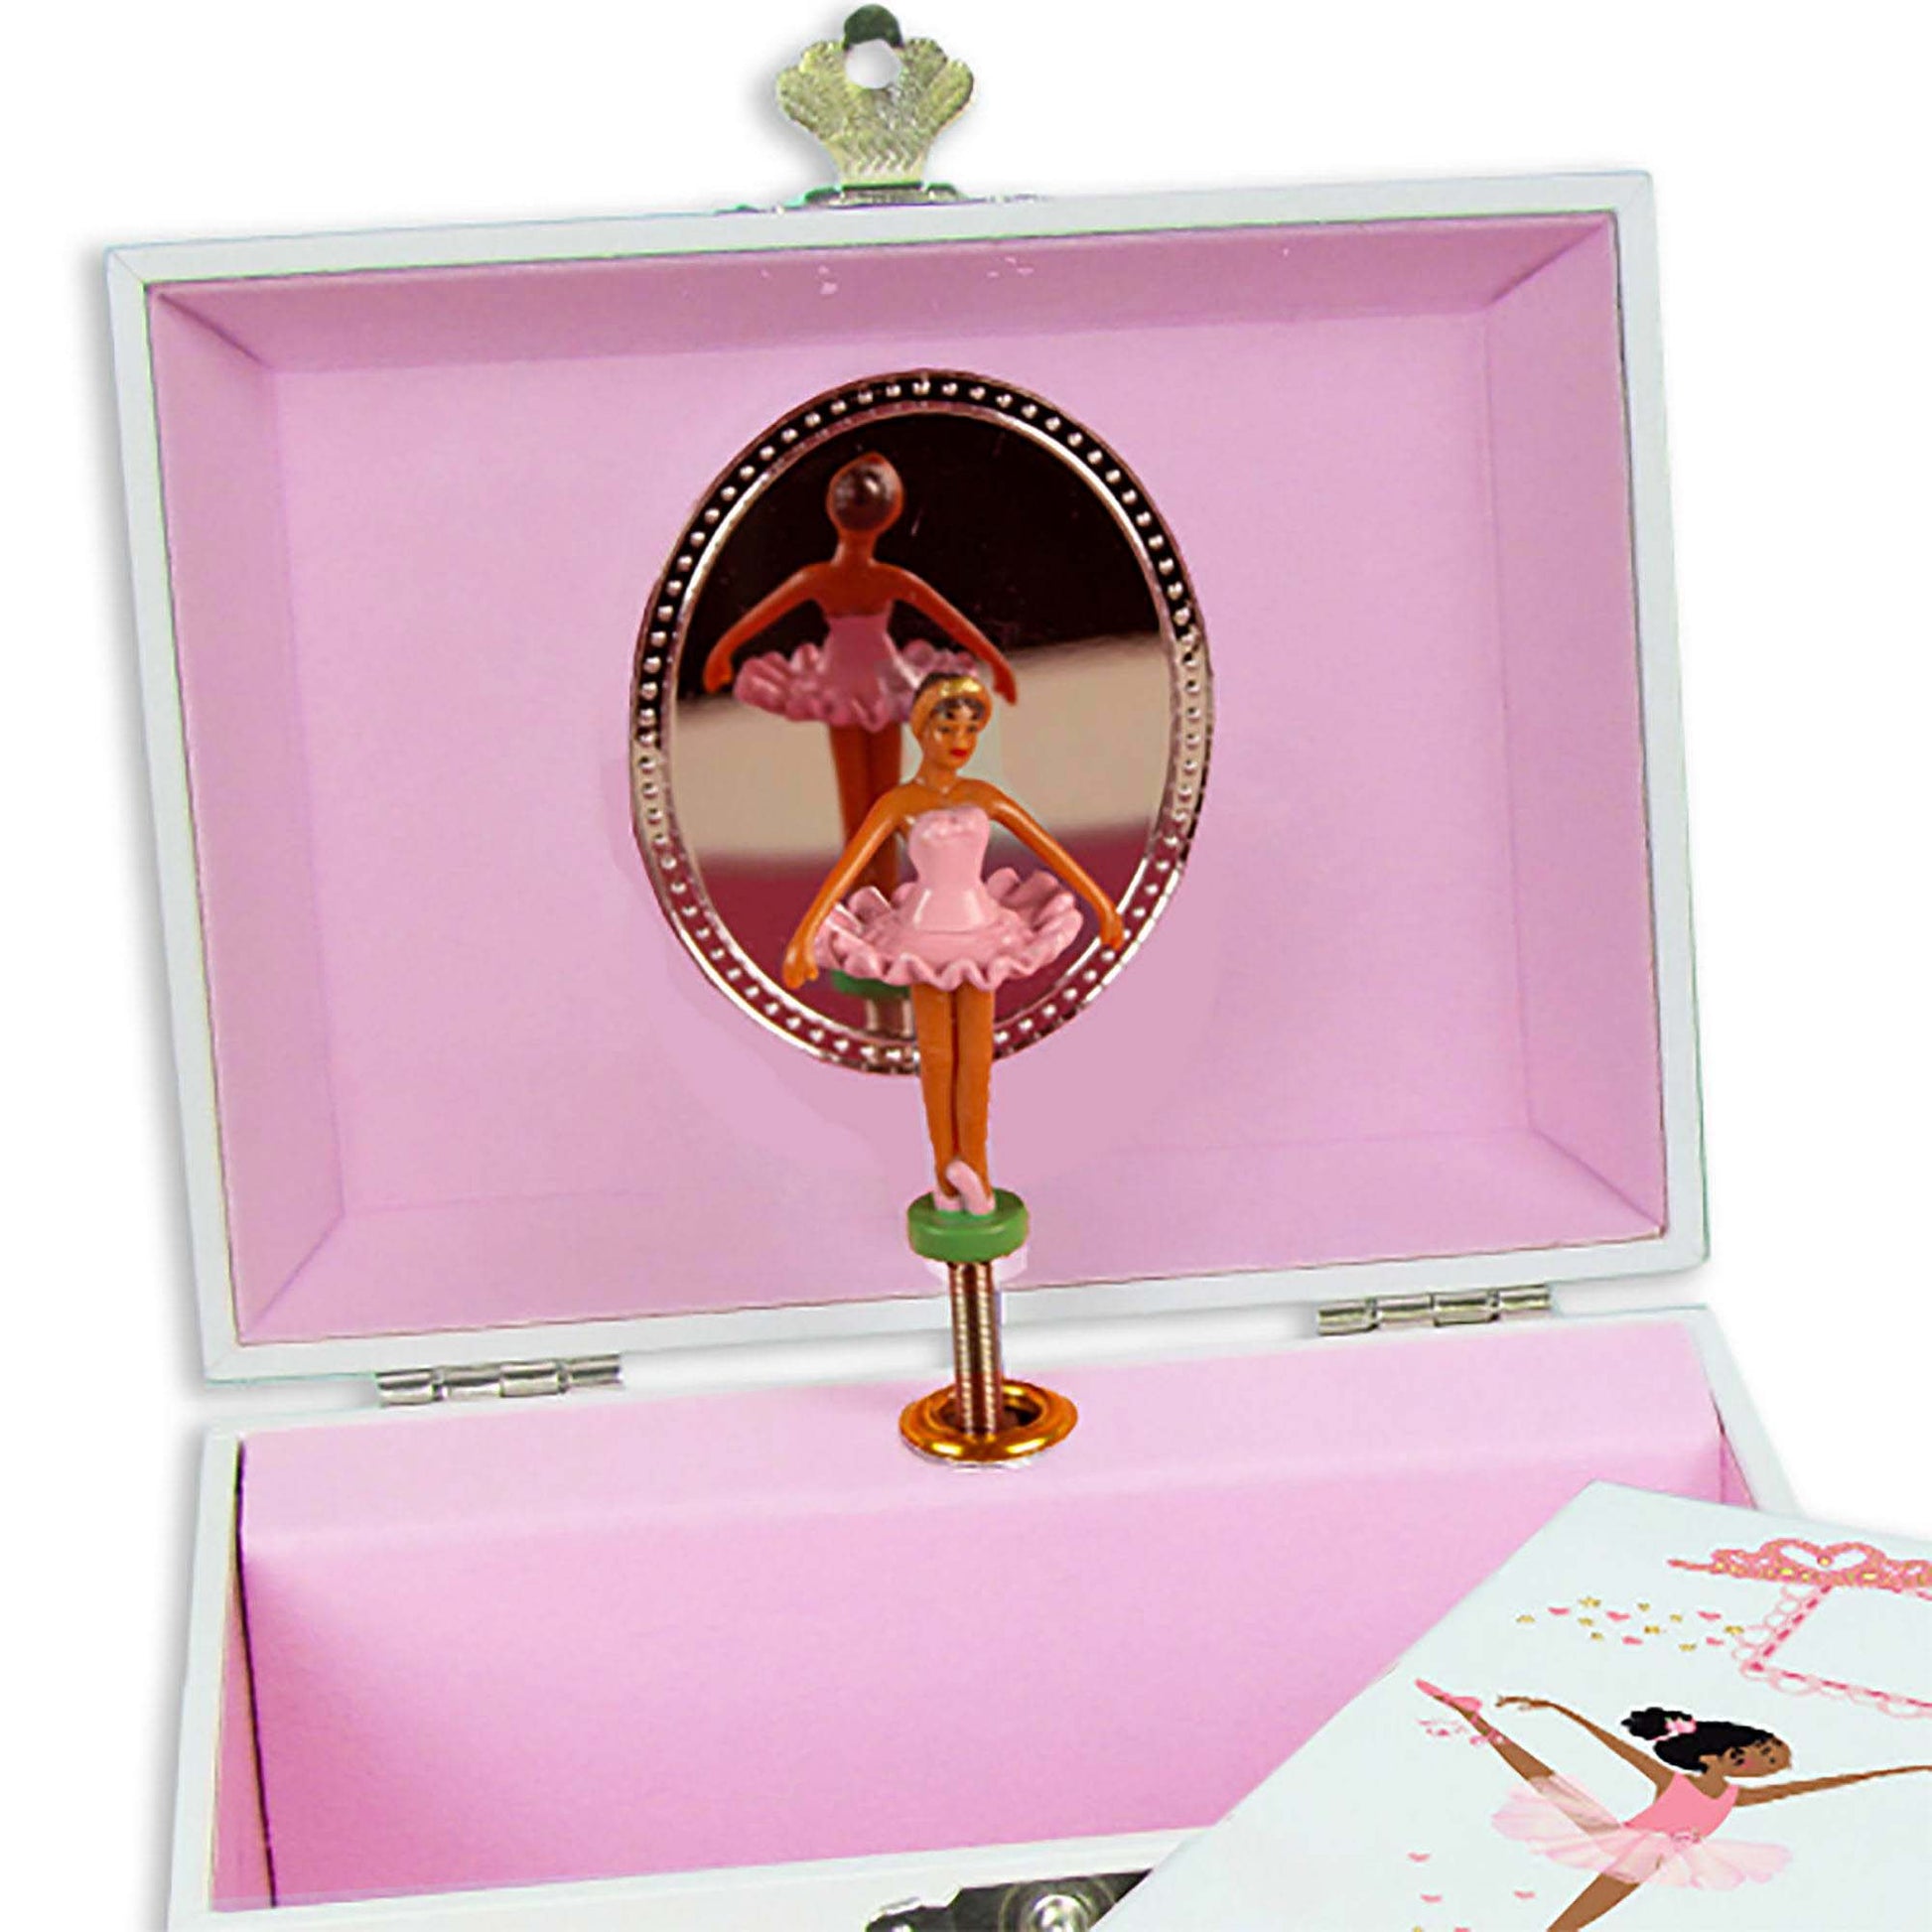 Personalized Ballerina Jewelry Box with Pink Whale design